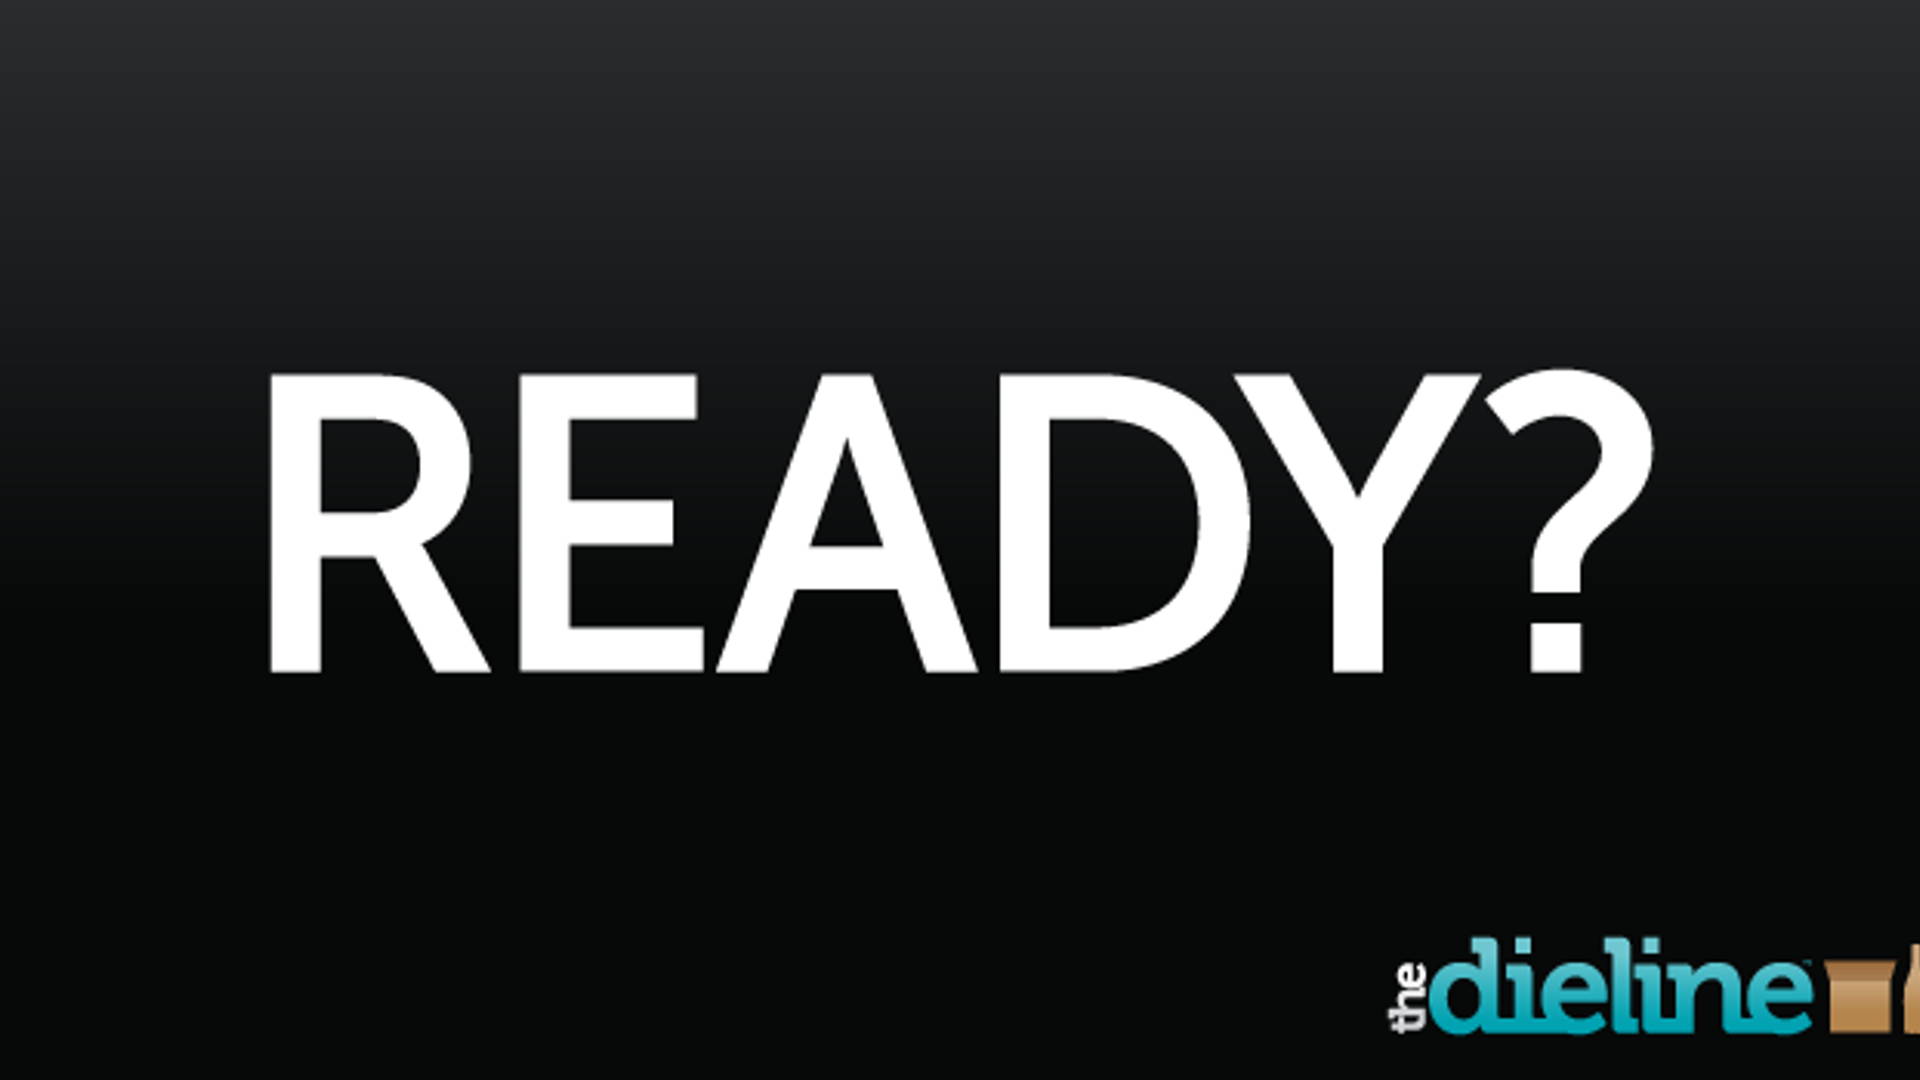 Featured image for Ready?